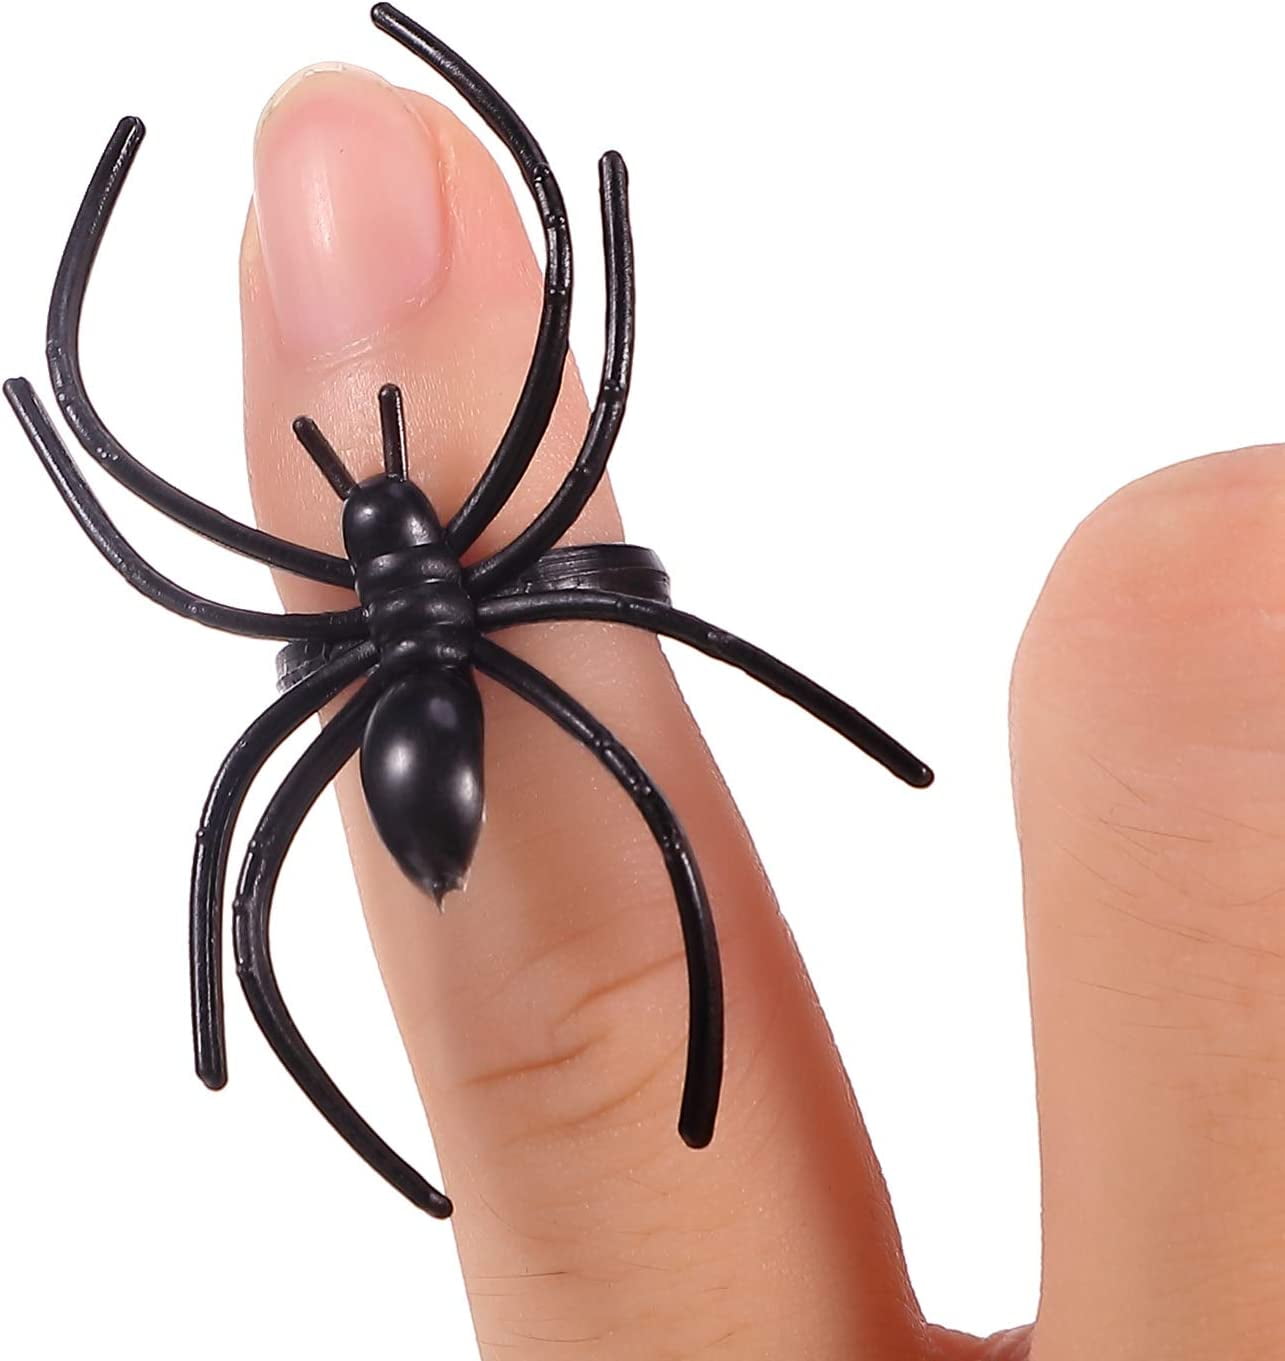  100 Bulk Halloween Spider Rings With Gems Assortment - Black  Rings with Assorted Gems for Creepy Crawly Party Favors, Treats, and  Cupcake Toppers : Toys & Games